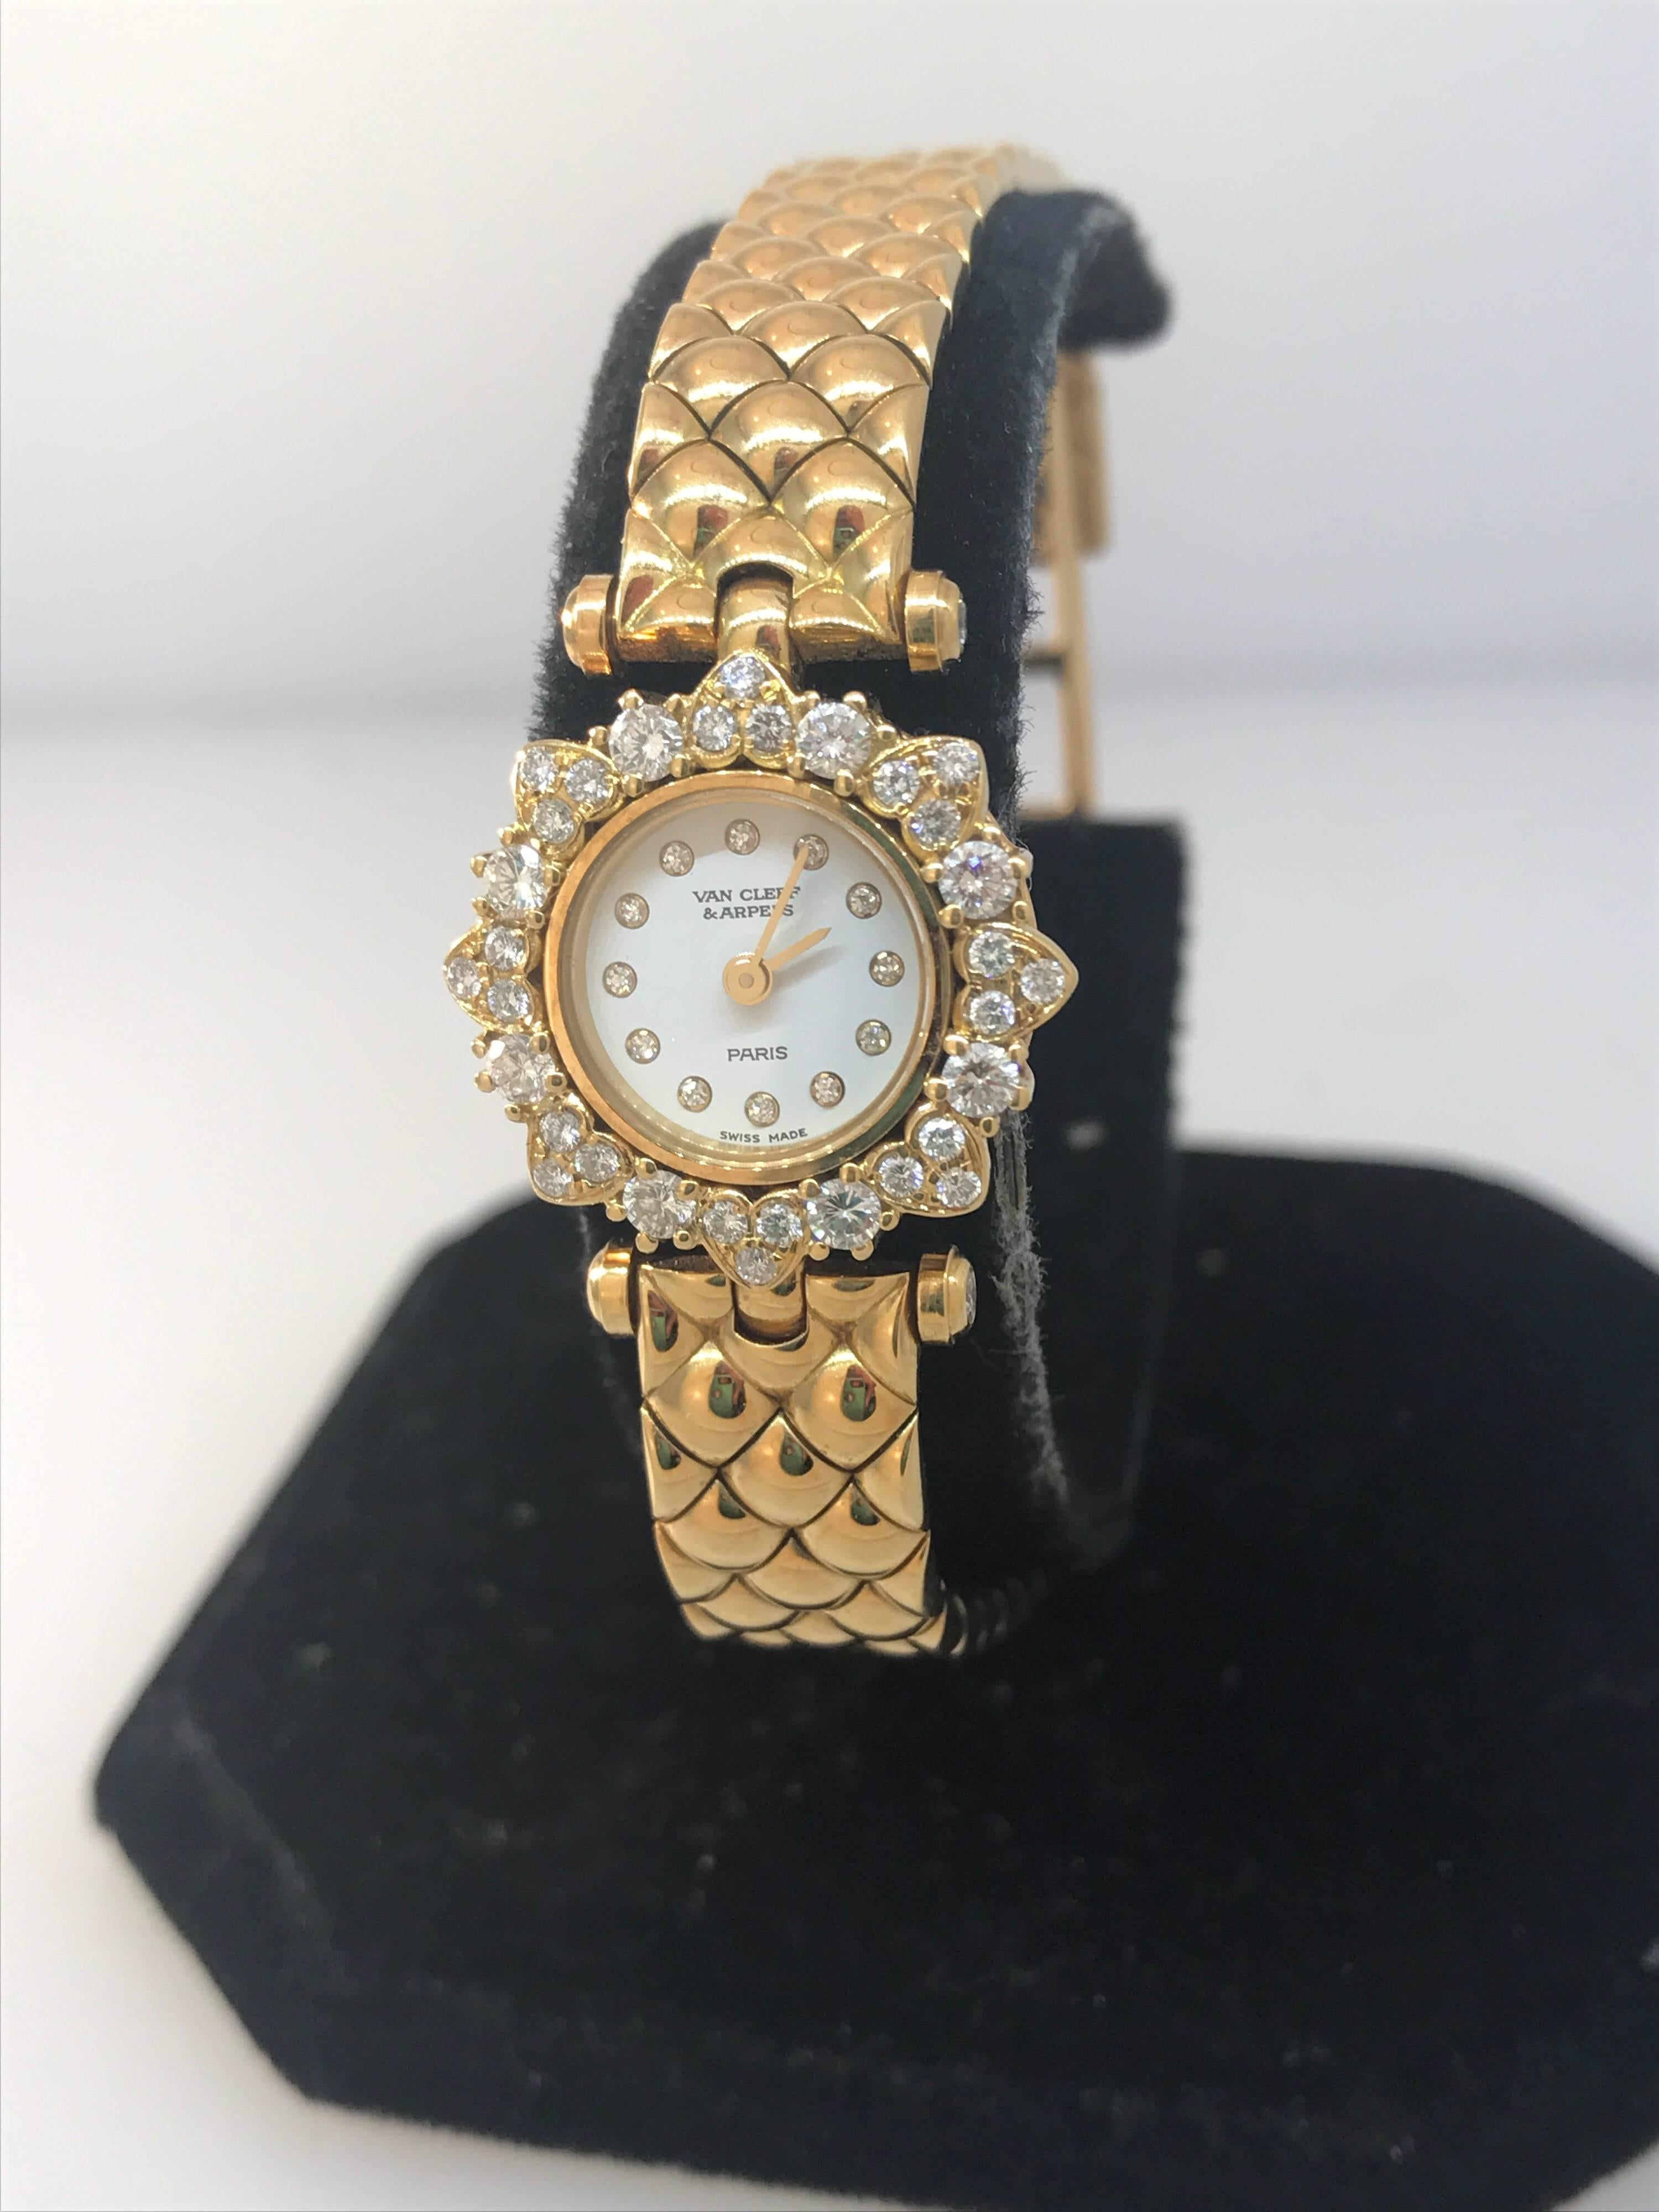 Van Cleef & Arpels Classique Ladies Watch

Model Number: 130955

100% Authentic

Pre Owned restored to be in Pristine and perfectly working condition

Comes with a generic watch box

18 Karat Yellow Gold Case & Bracelet

Diamond Bezel

White Dial